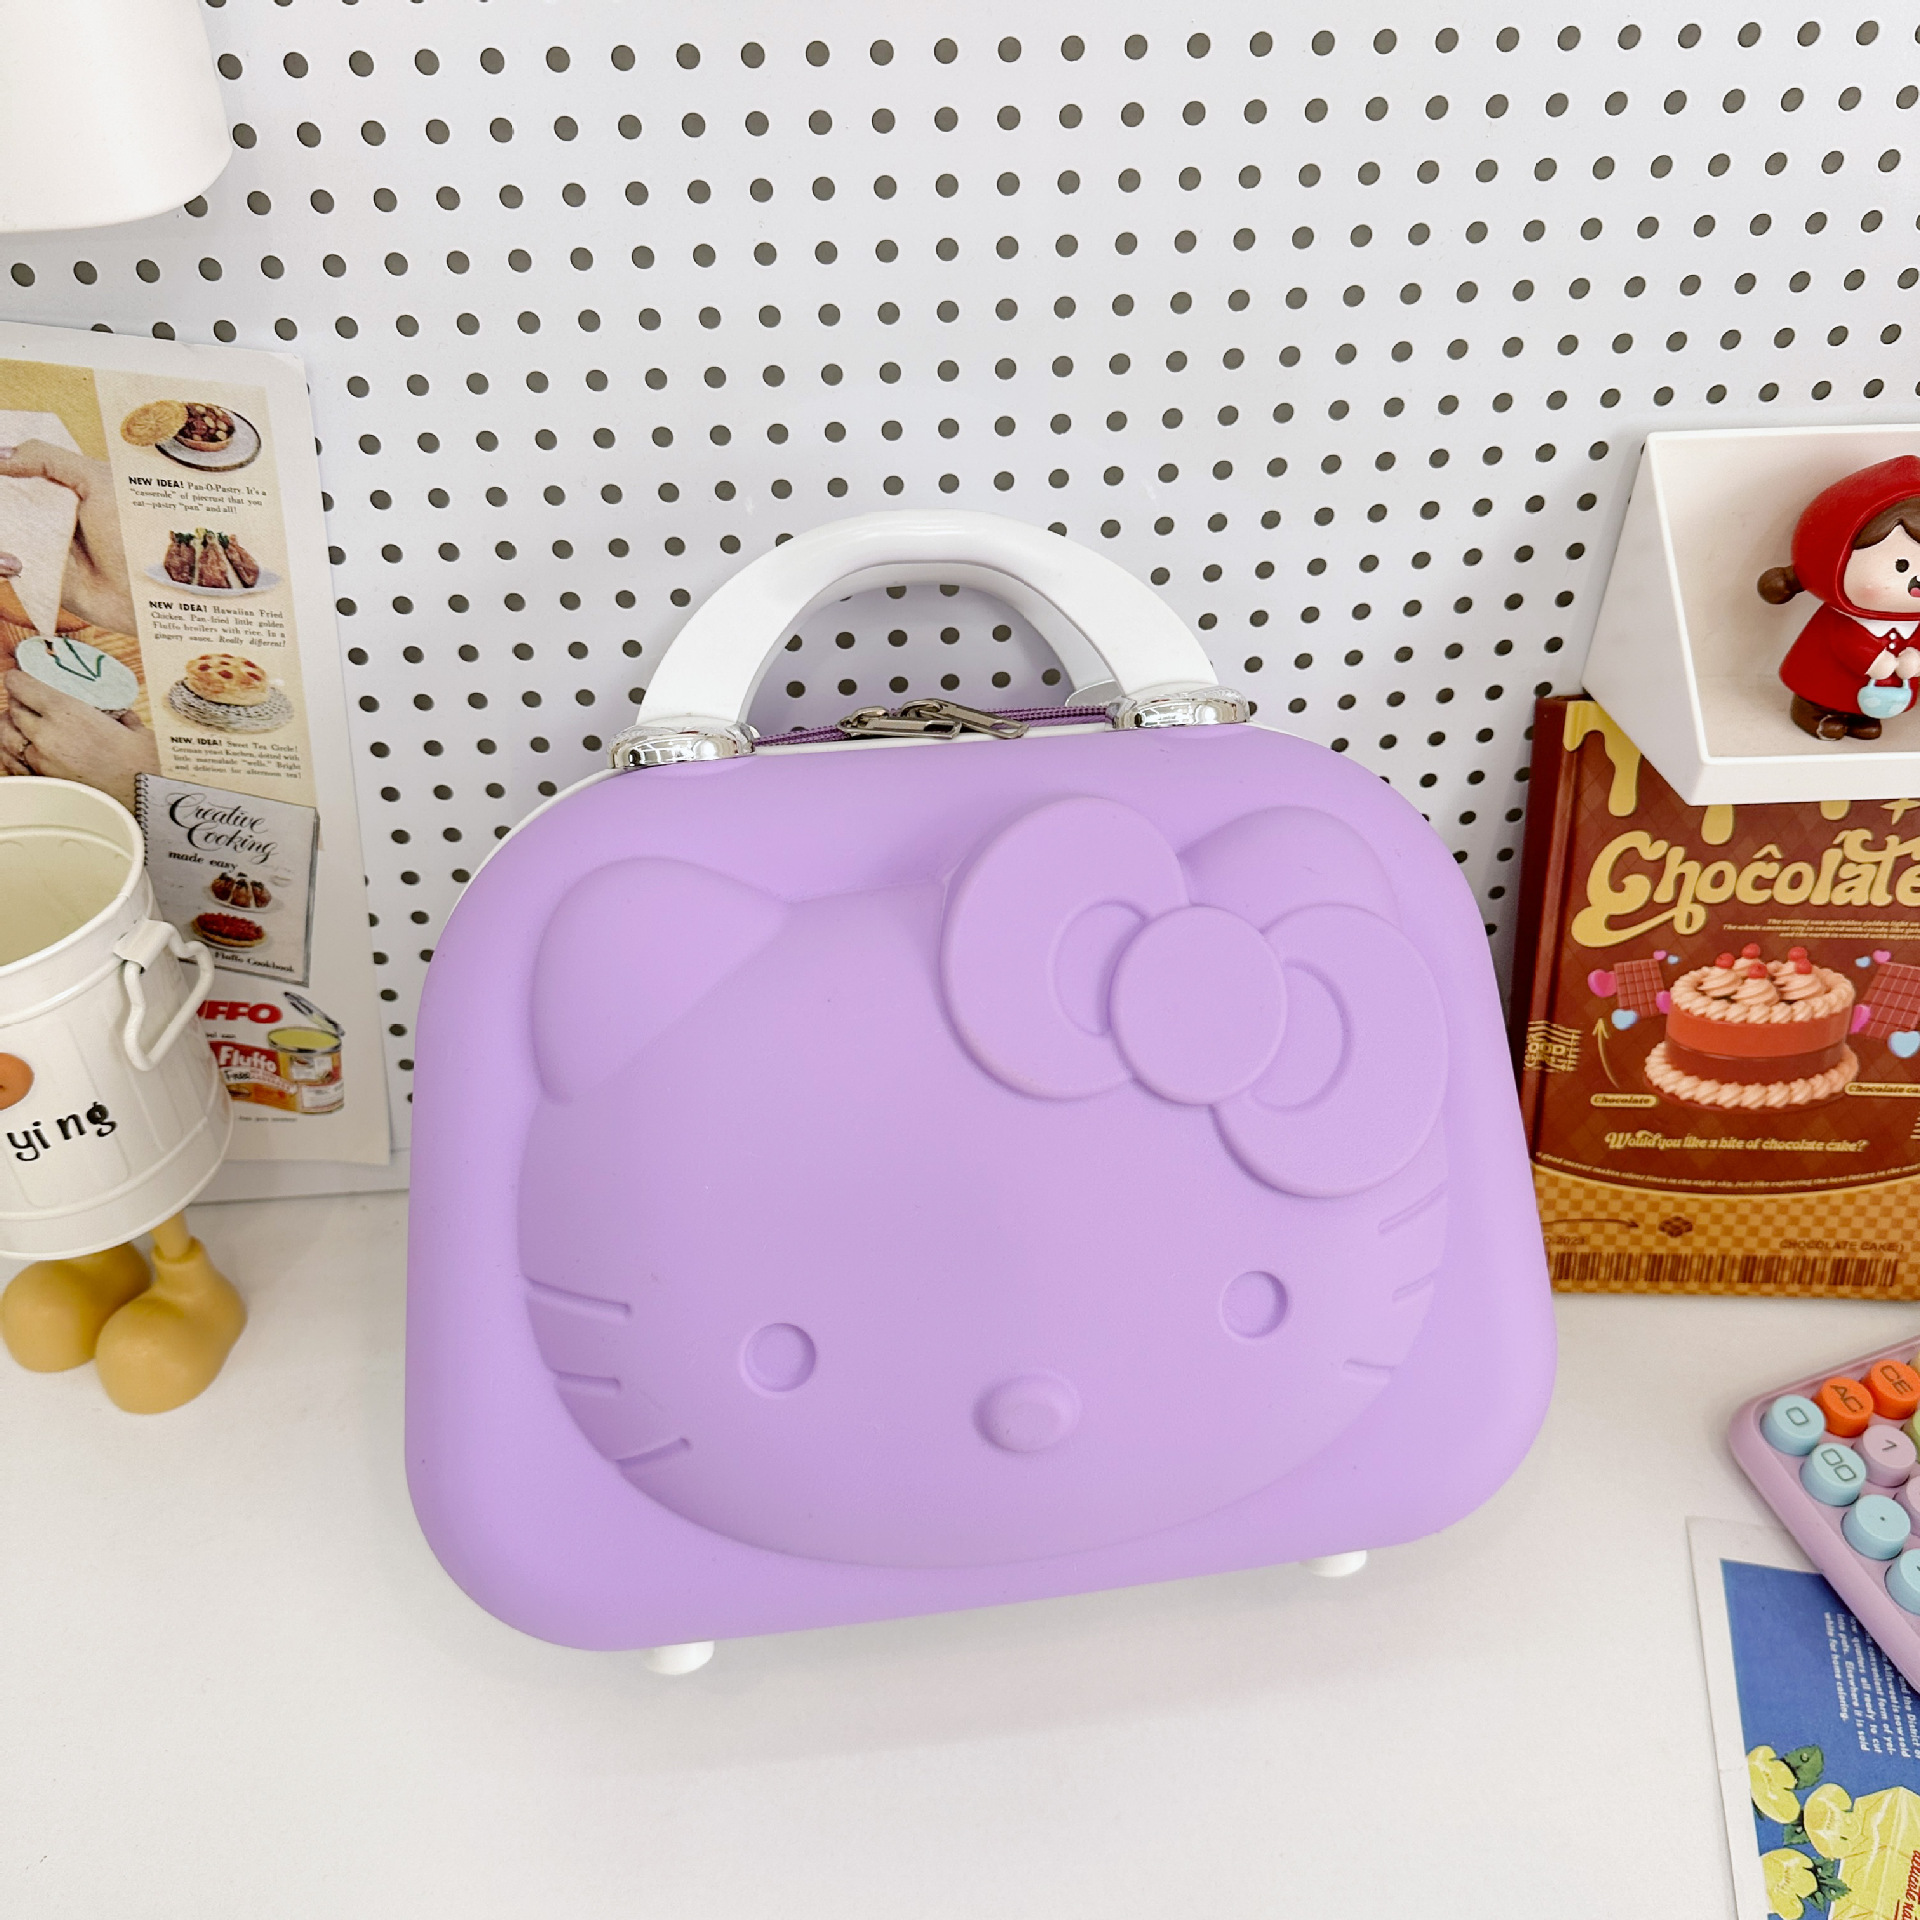 Cosmetic Case Suitcase Cute Cartoon Suitcase Sanrio Hello Kitty Cosmetic Case Foreign Trade Gift Luggage Kitten Cosmetic Case